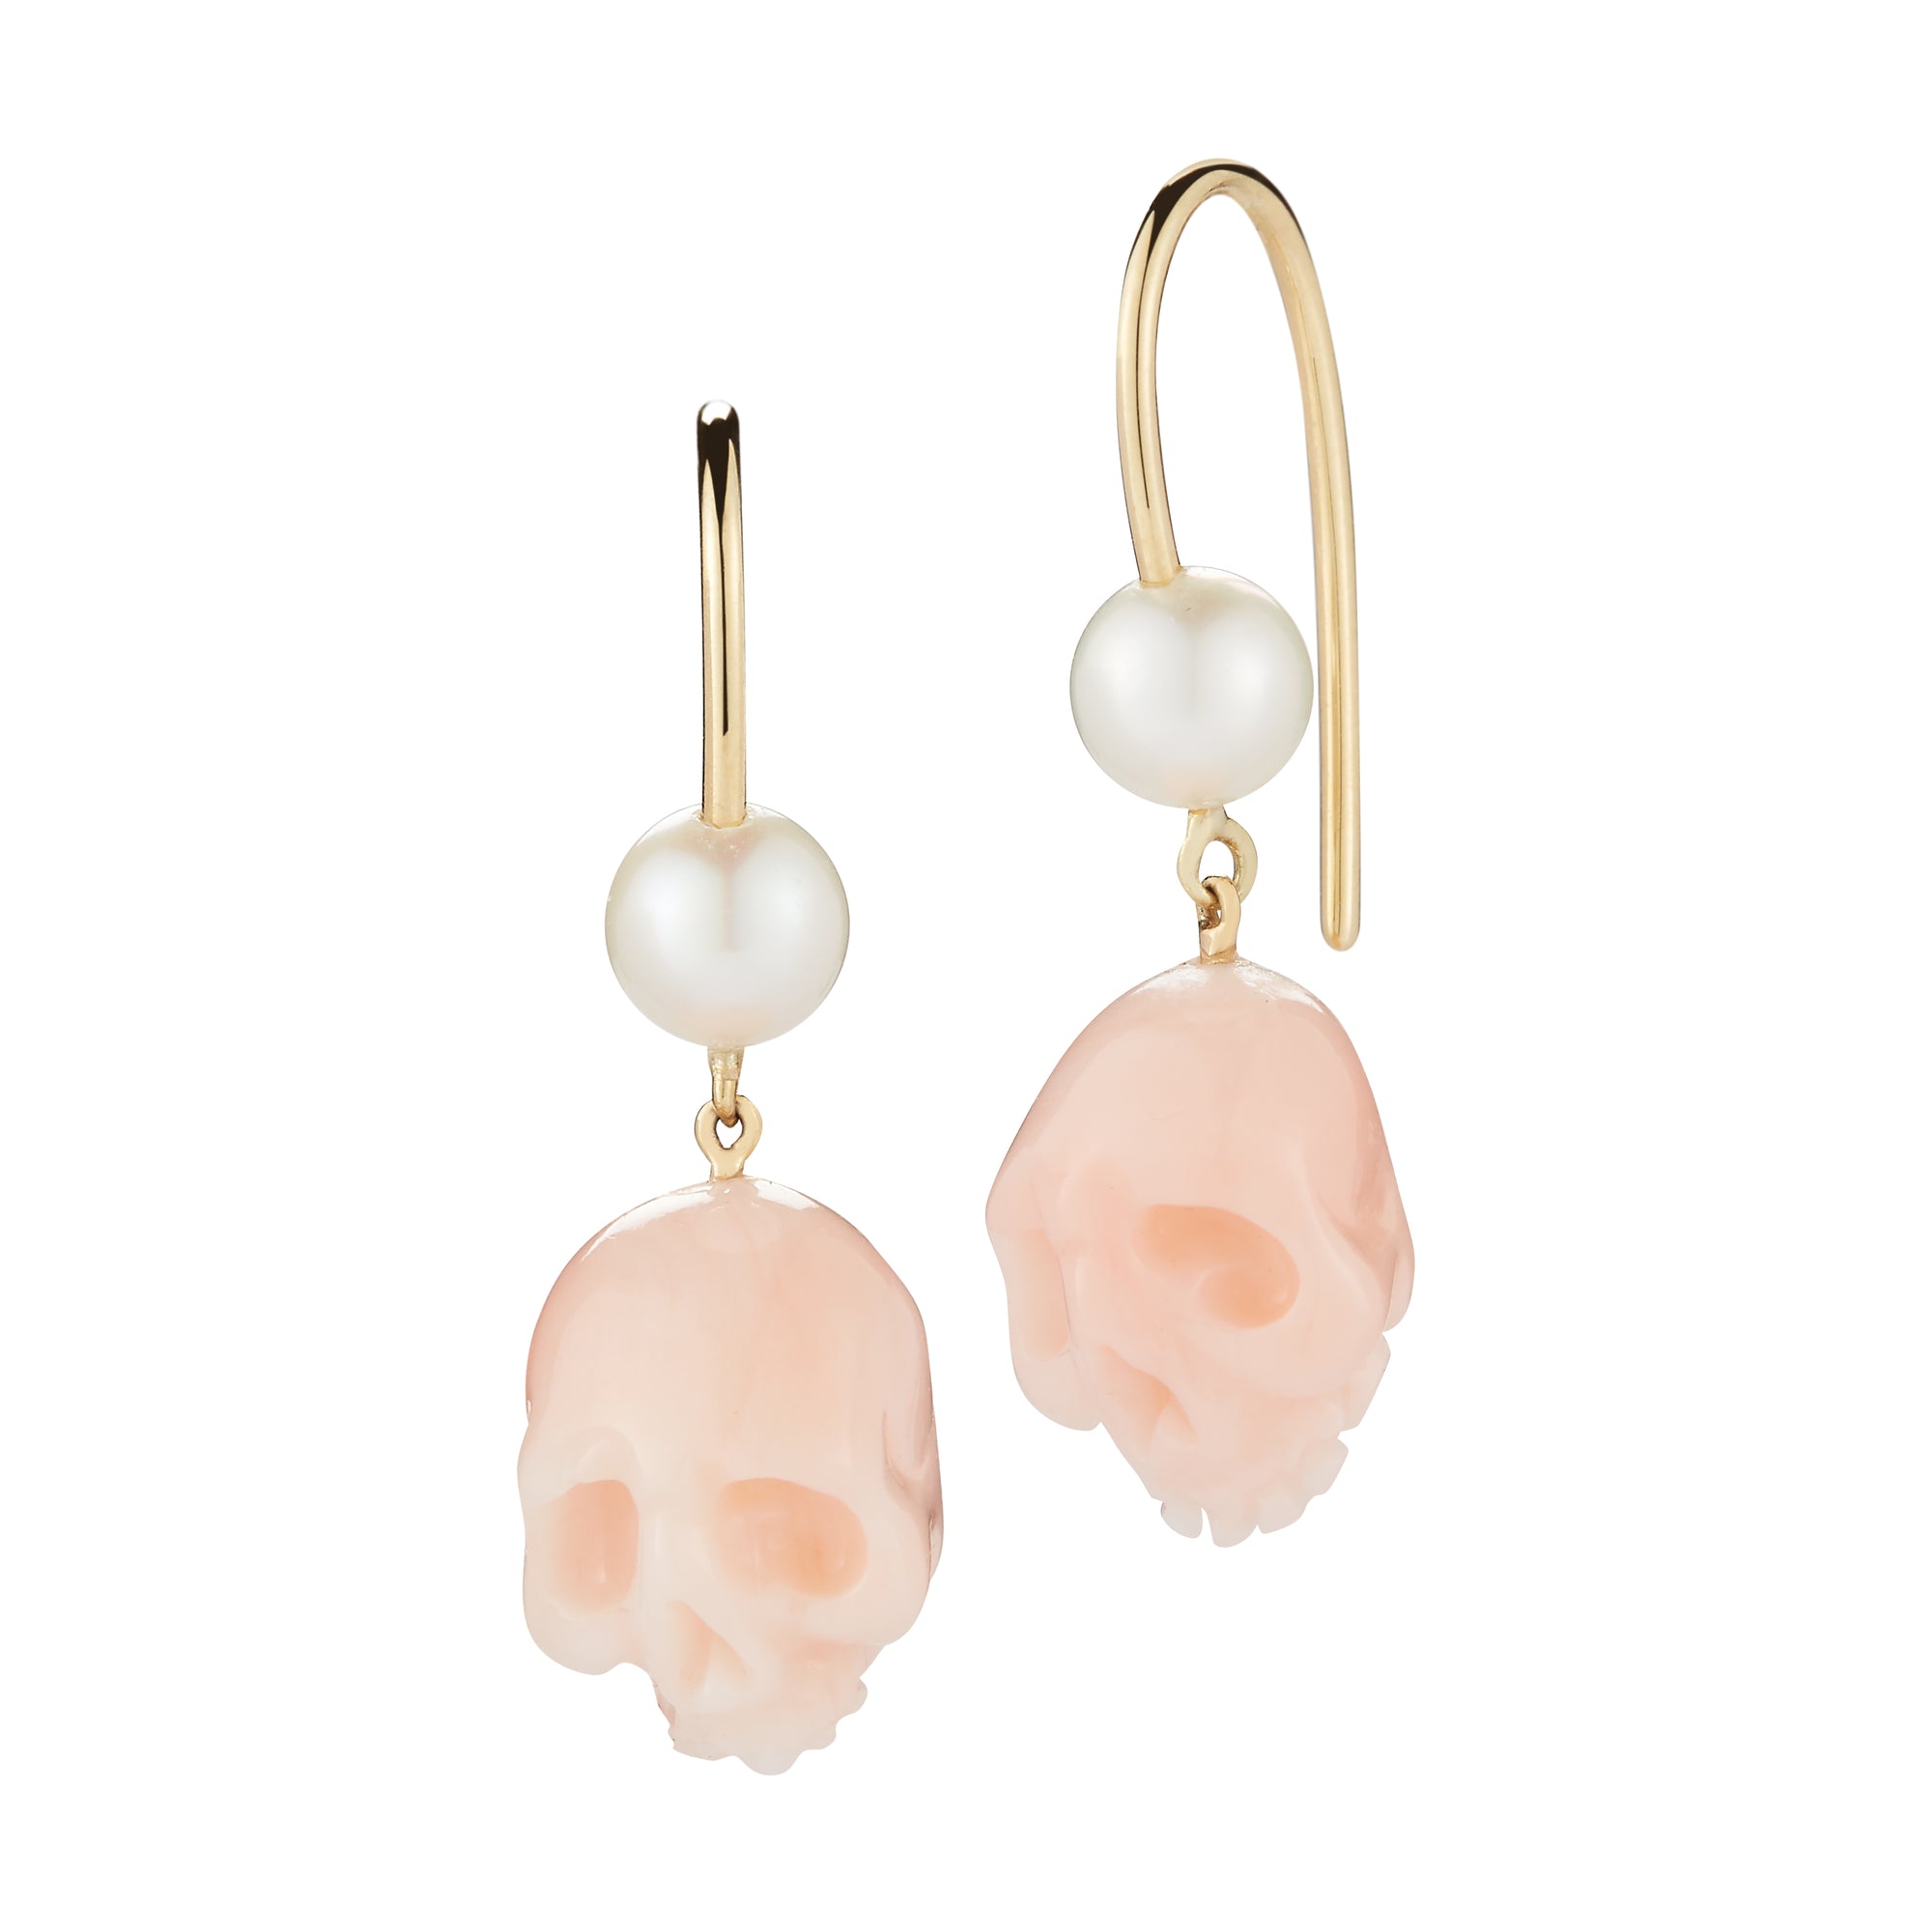 18k gold skull dangle earrings in coral pink with akoya pearls by finn by candice pool neistat